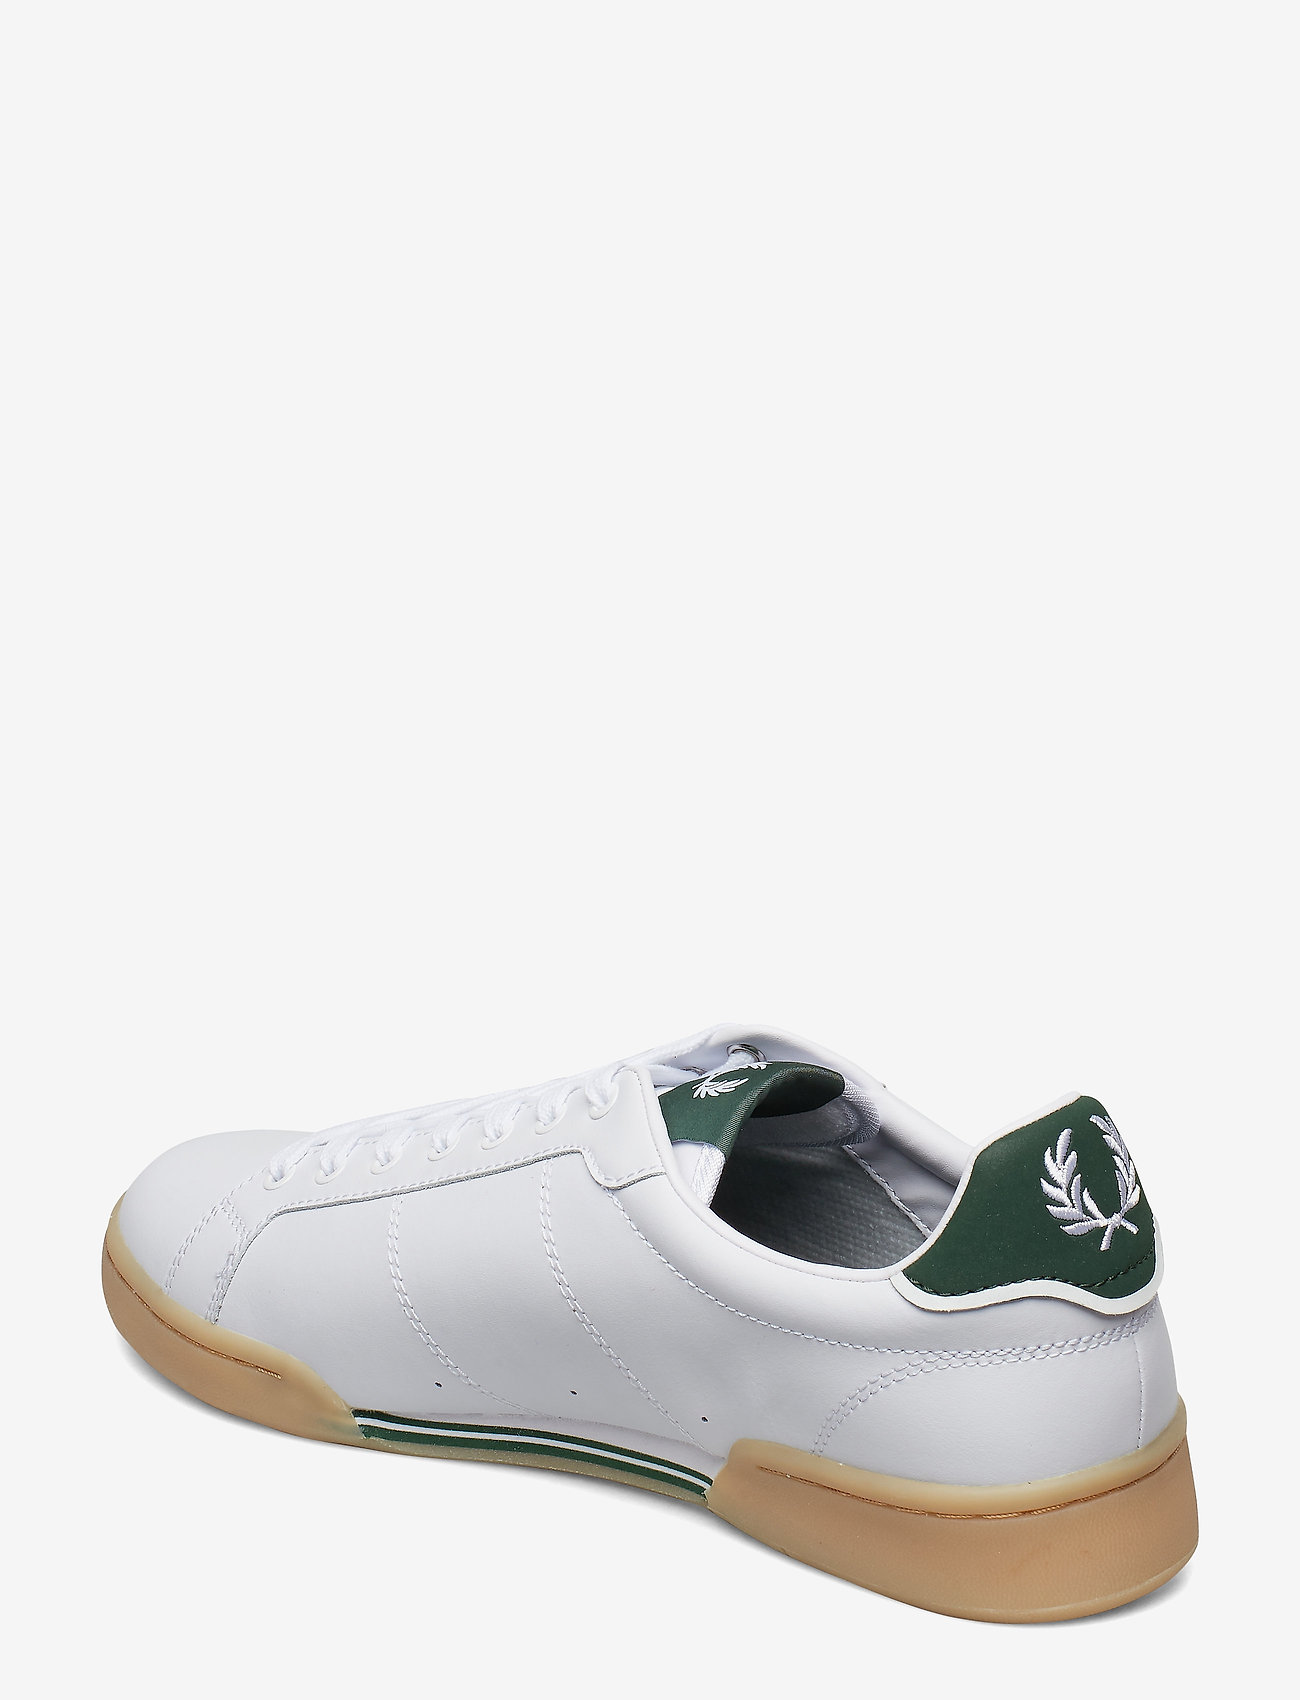 Fred Perry Men Casual Shoes B722 Leather Sneakers White 